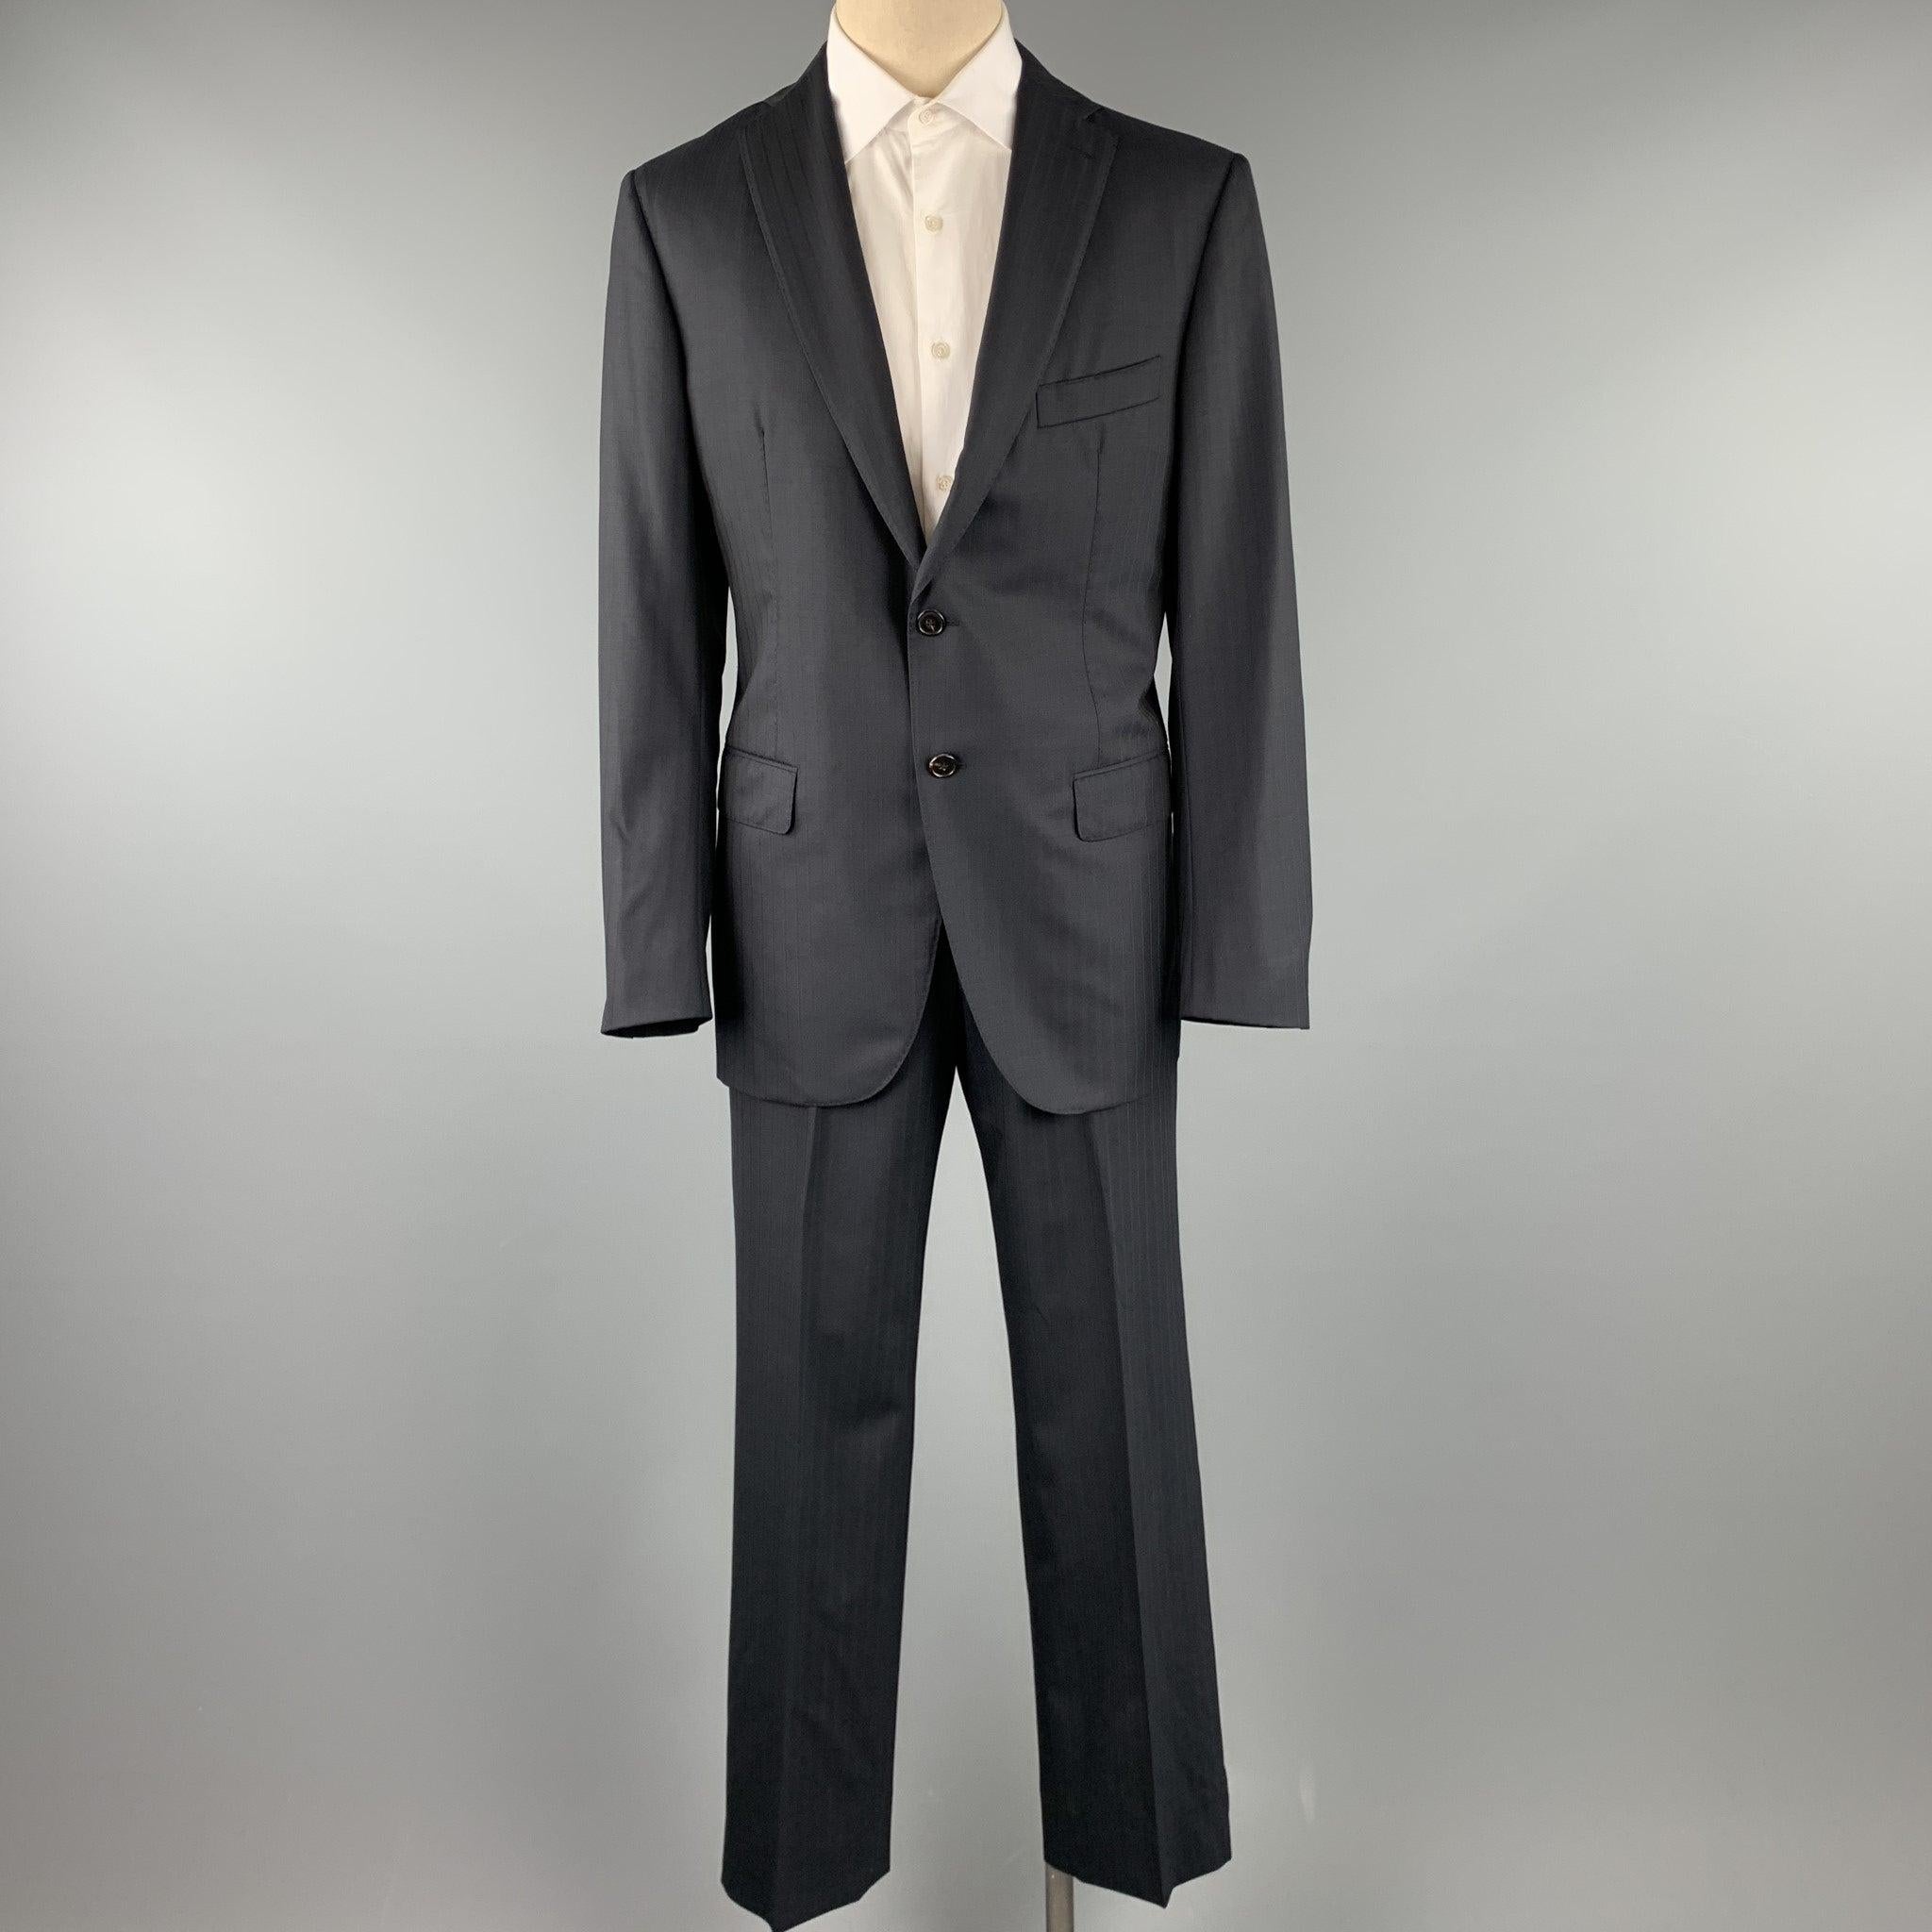 BELVEST suit comes in a black stripe wool with a full monogram print liner and includes a single breasted, two button sport coat with lapel and matching flat front trousers. Pin hole on sleeve back. As-Is. Made in Italy.
Good Pre-Owned Condition.